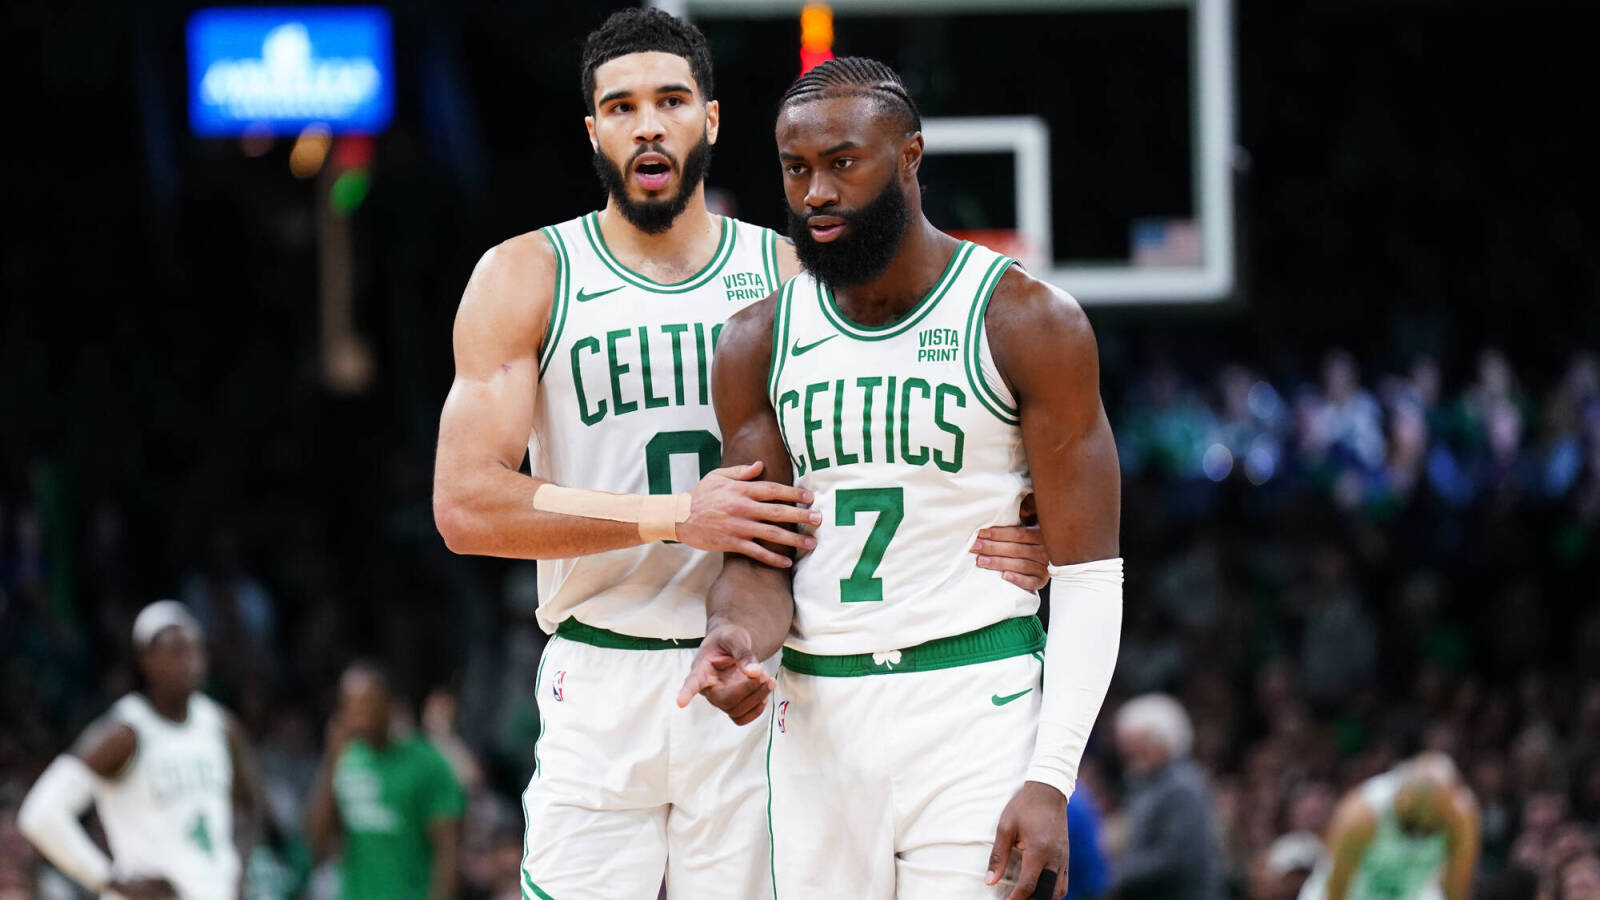 Celtics trio makes NBA playoffs history in Game 1 win